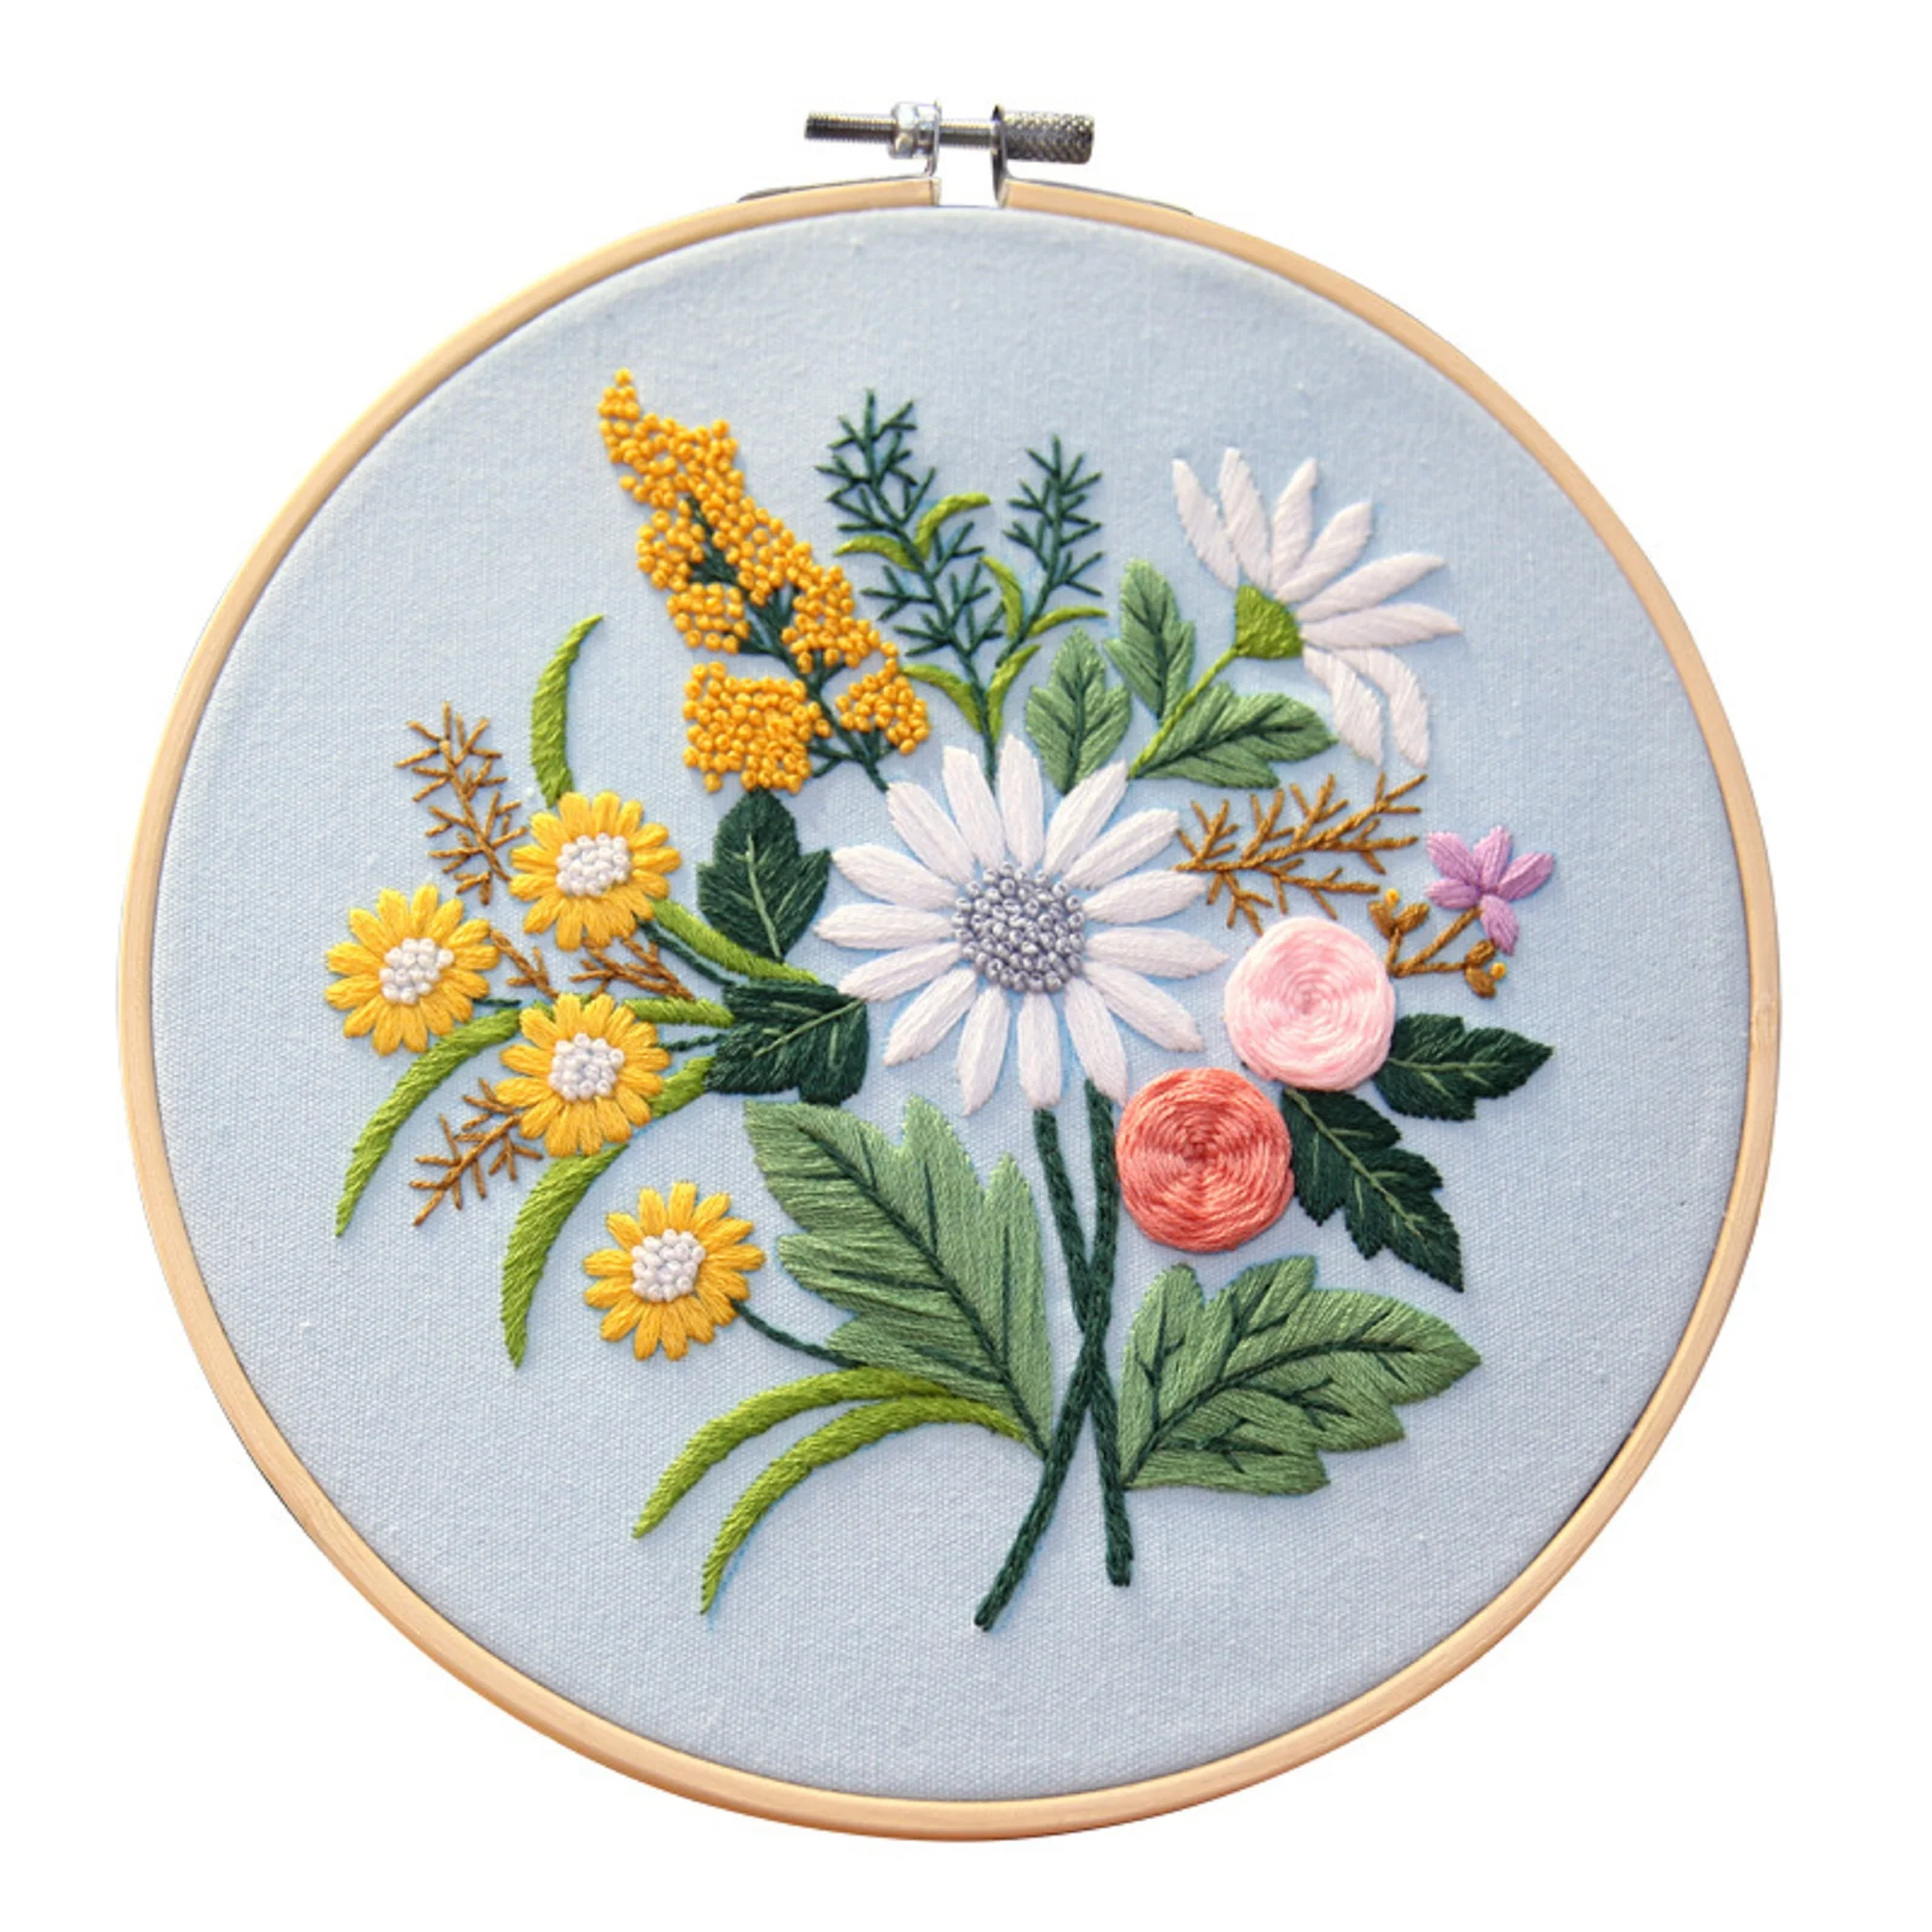 6 Hoops and Needles for Adults and Kids Beginners Embroidery Kit with 6 Pieces Cotton Cloth 